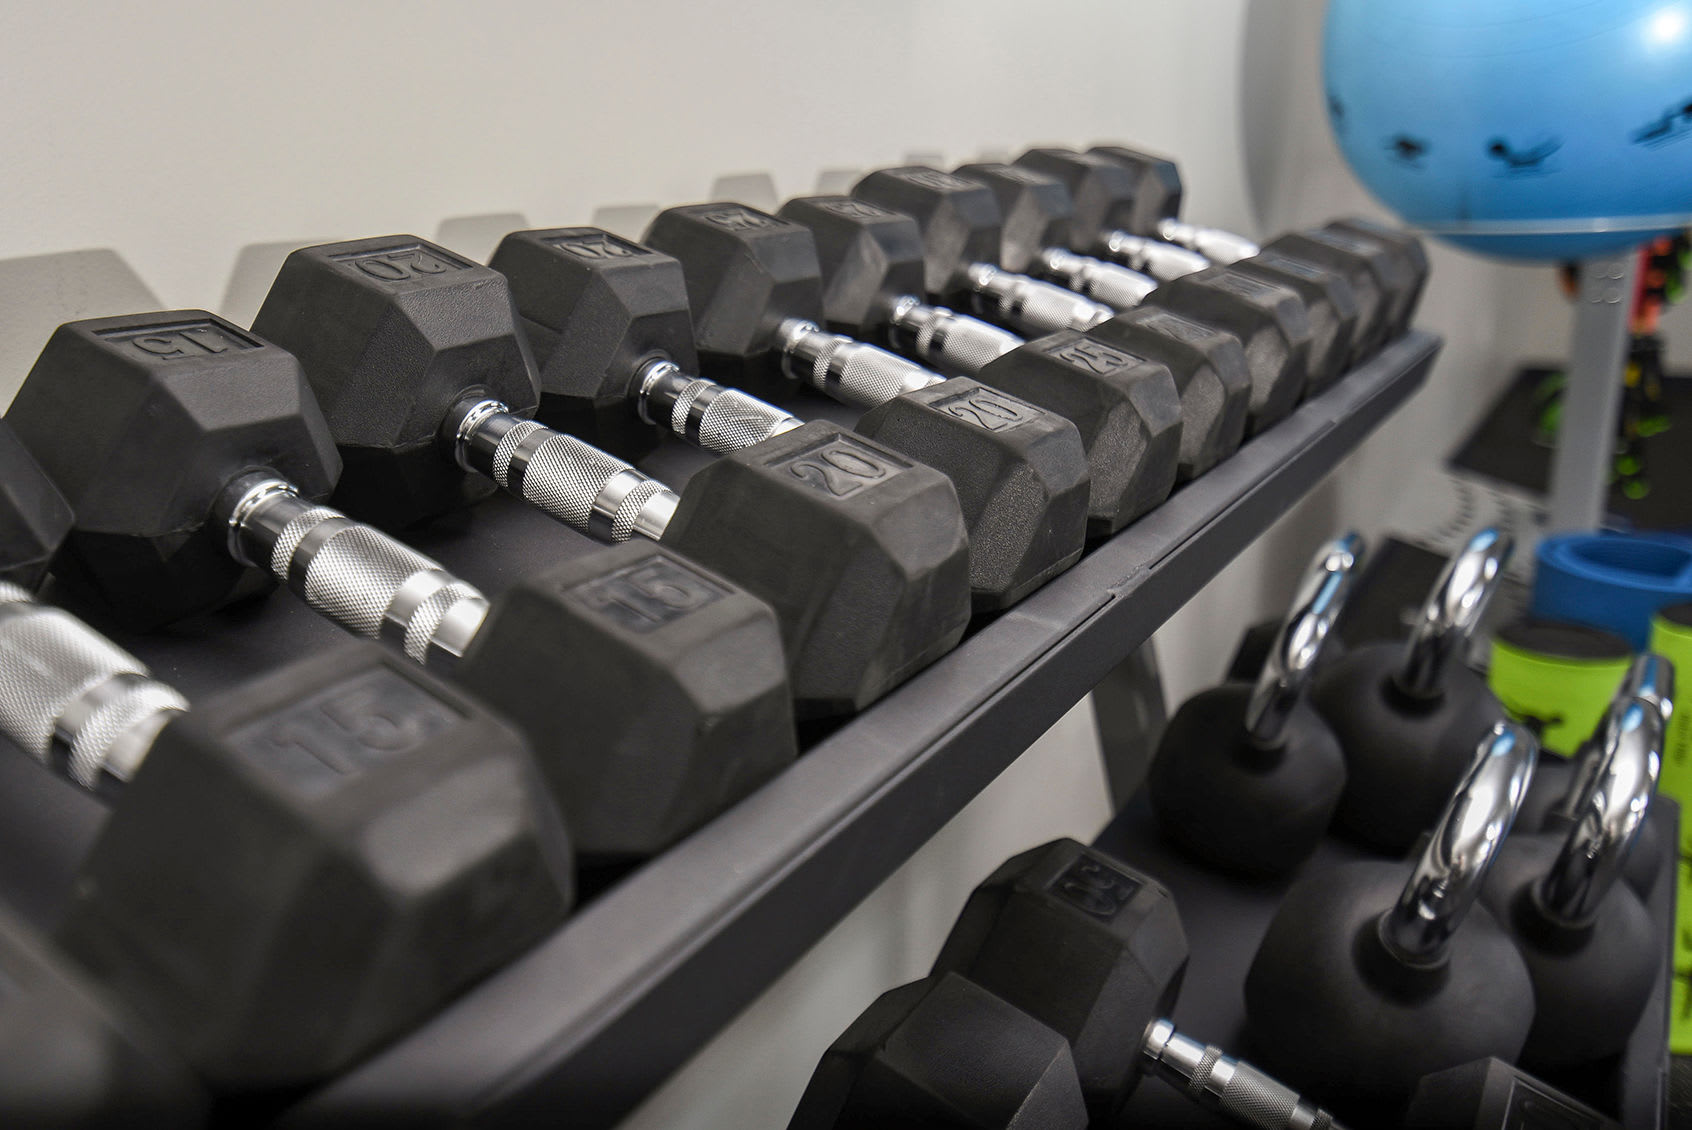 Dumbbells on a rack in the on-site fitness center at SilverLake in Belleville, New Jersey